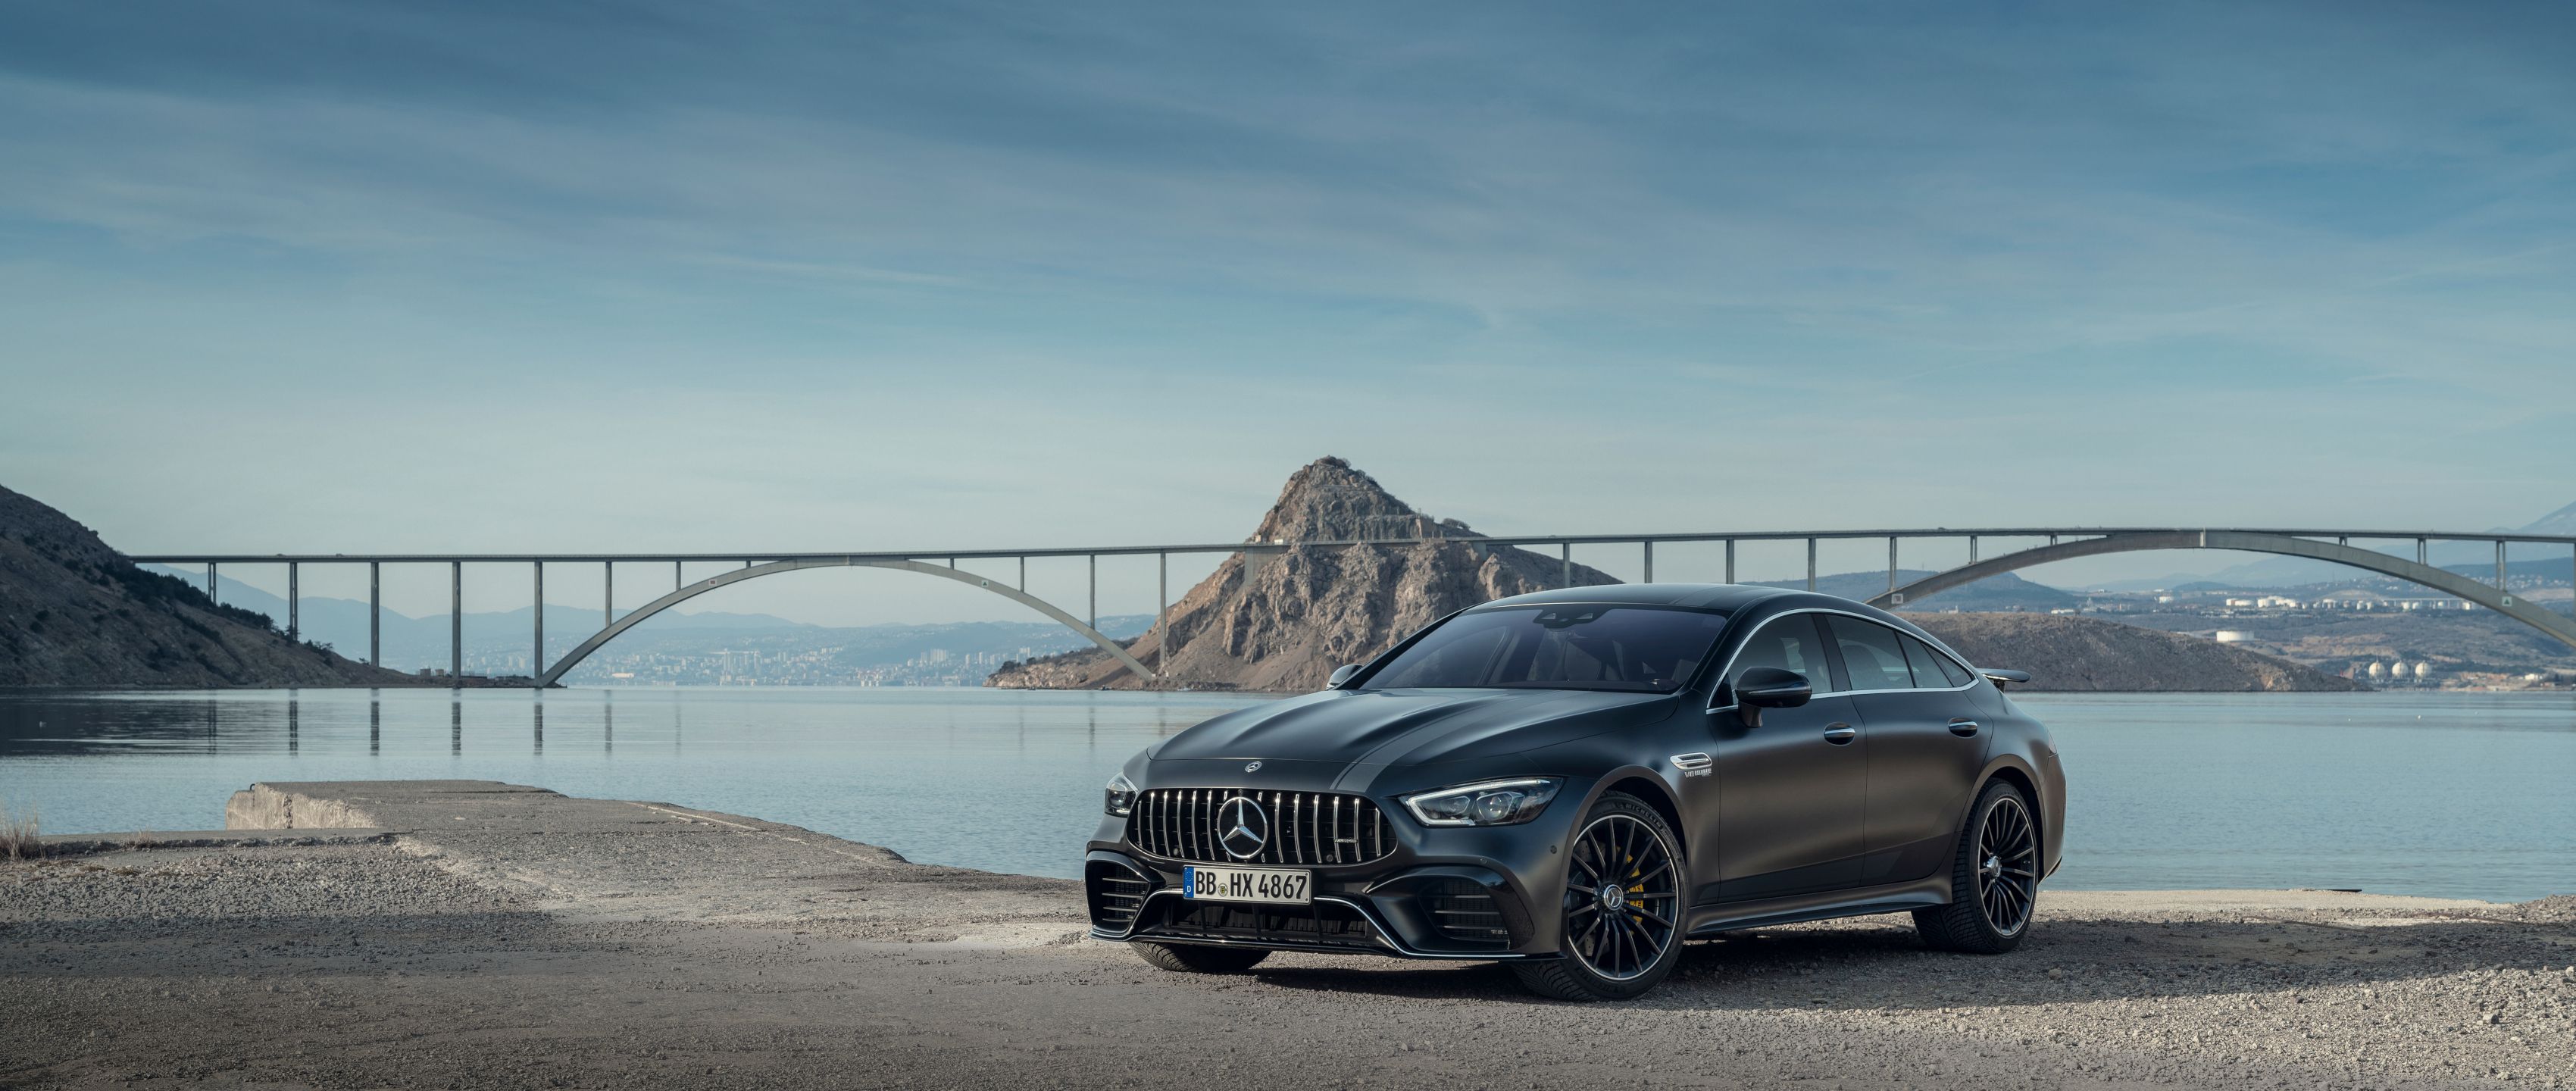 Amg Gt 63 Wallpapers